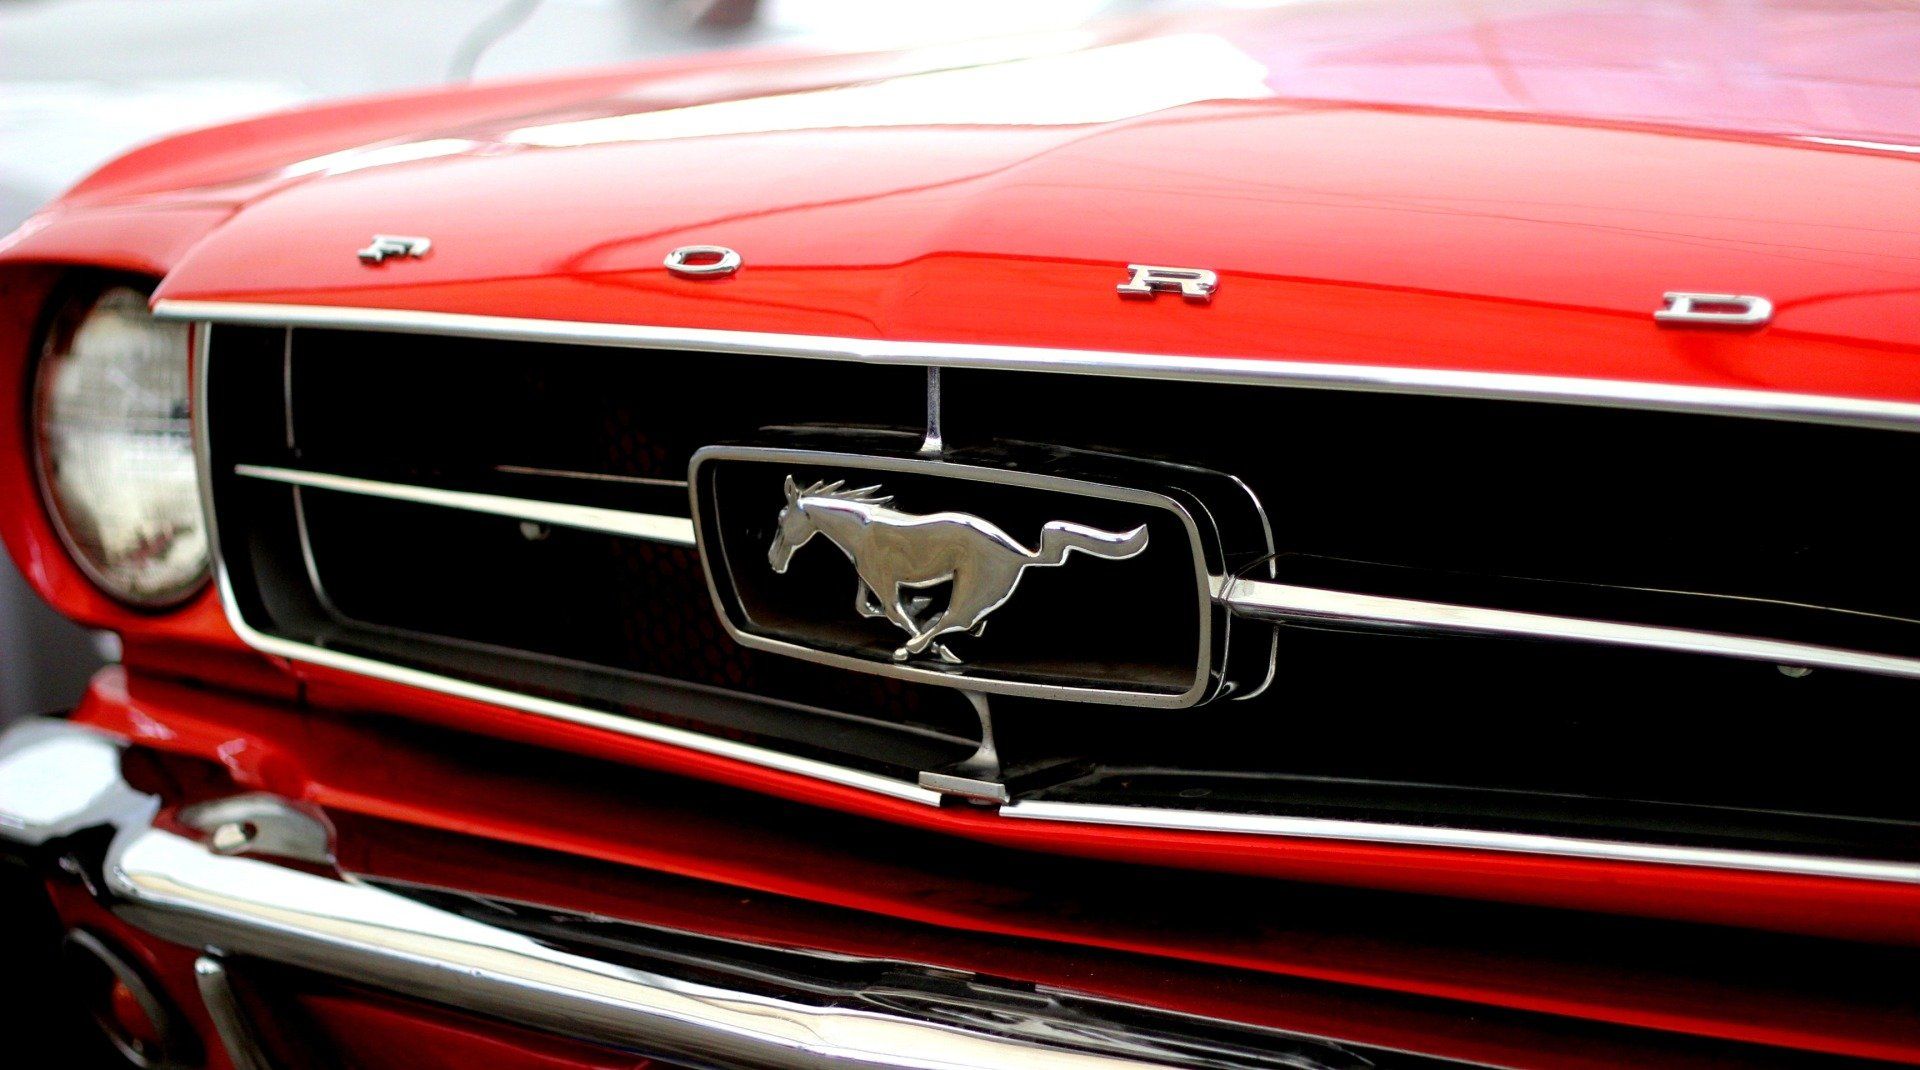 Sell Your Ford Mustang Today for What It’s Worth